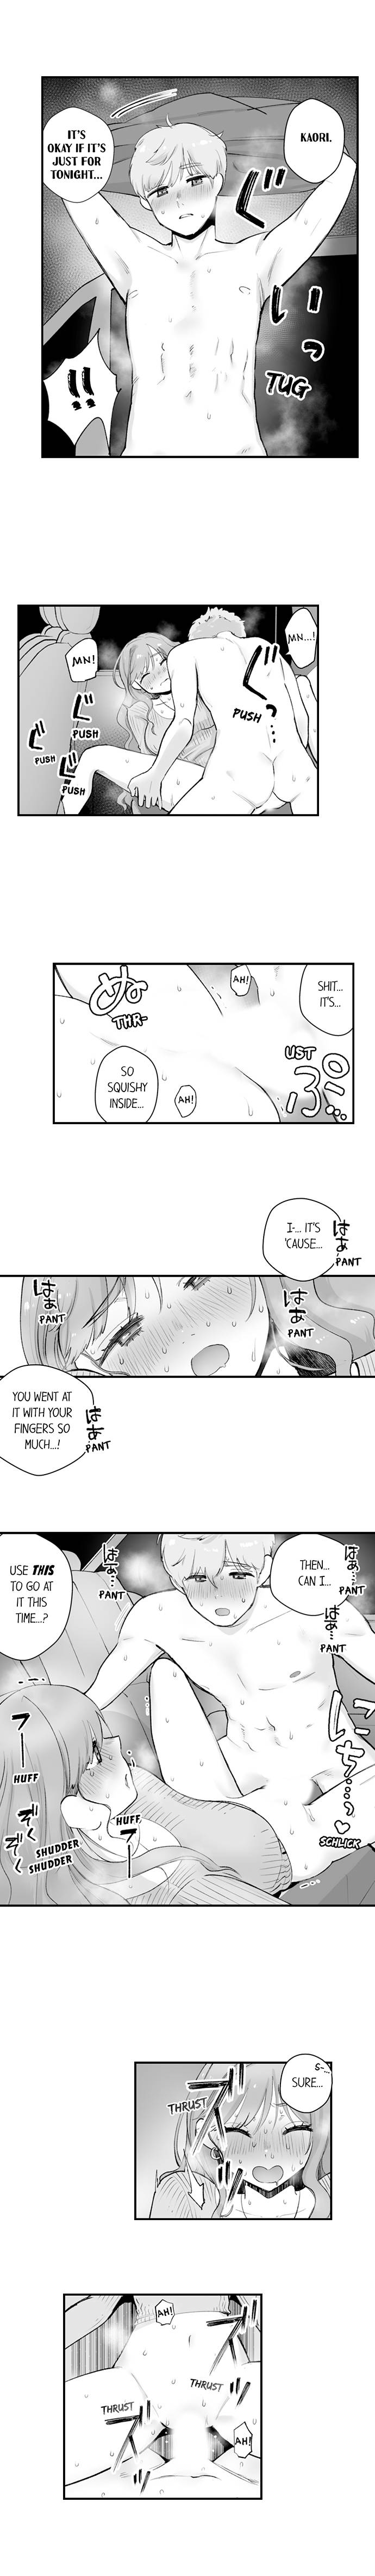 The Massage ♂♀ The Pleasure of Full Course Sex Chapter 8 - Page 7